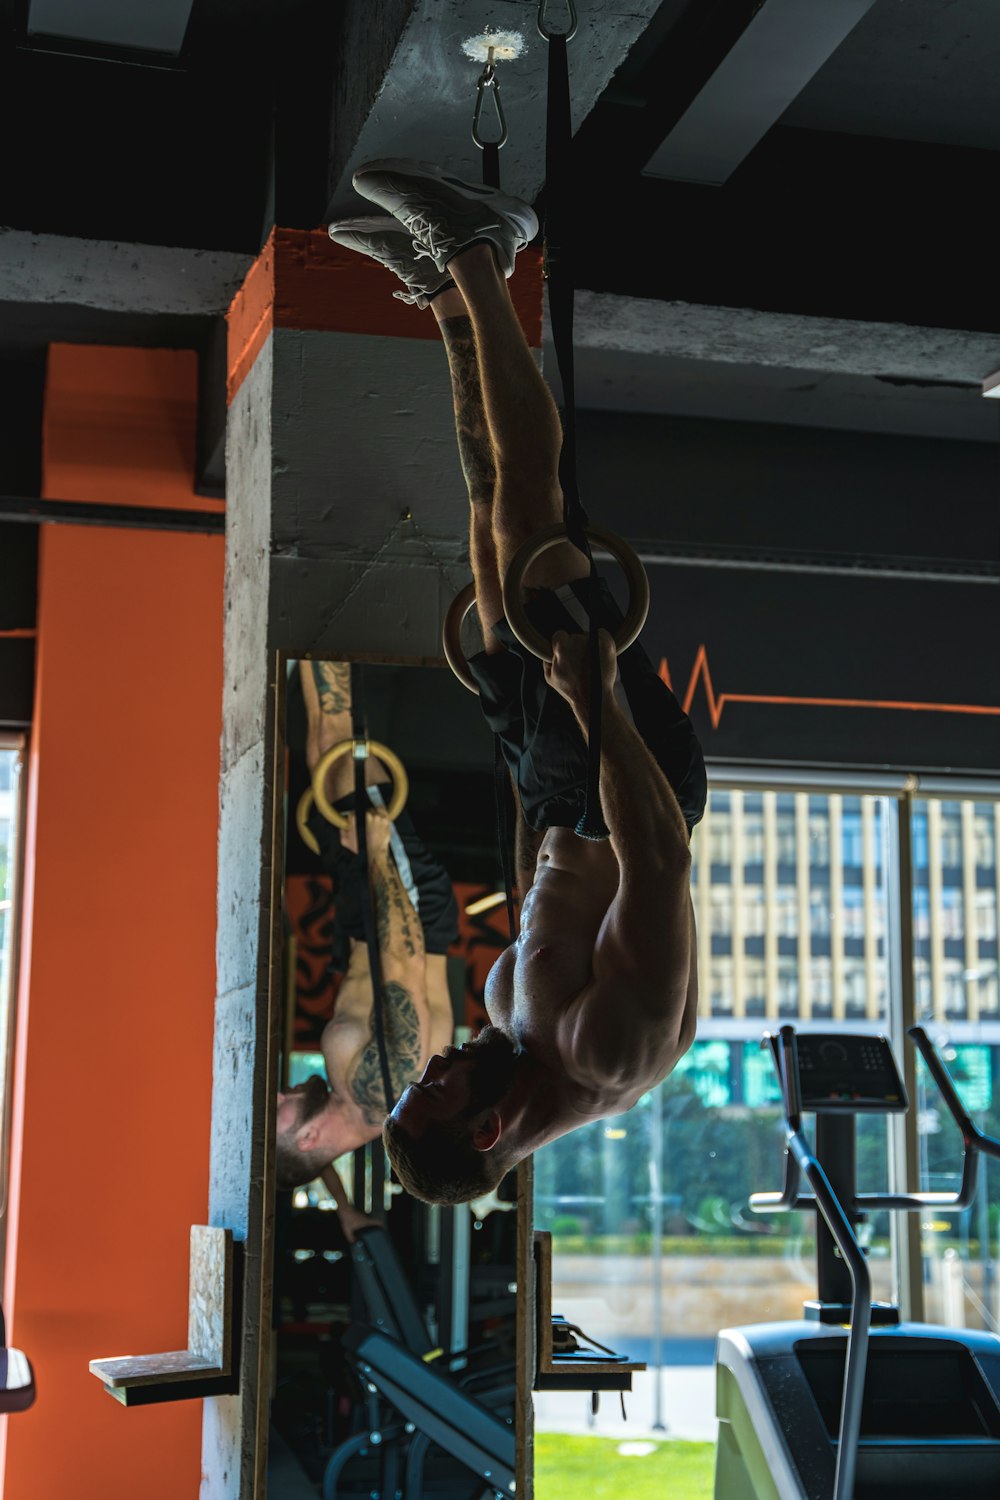 a man hanging upside down in a gym